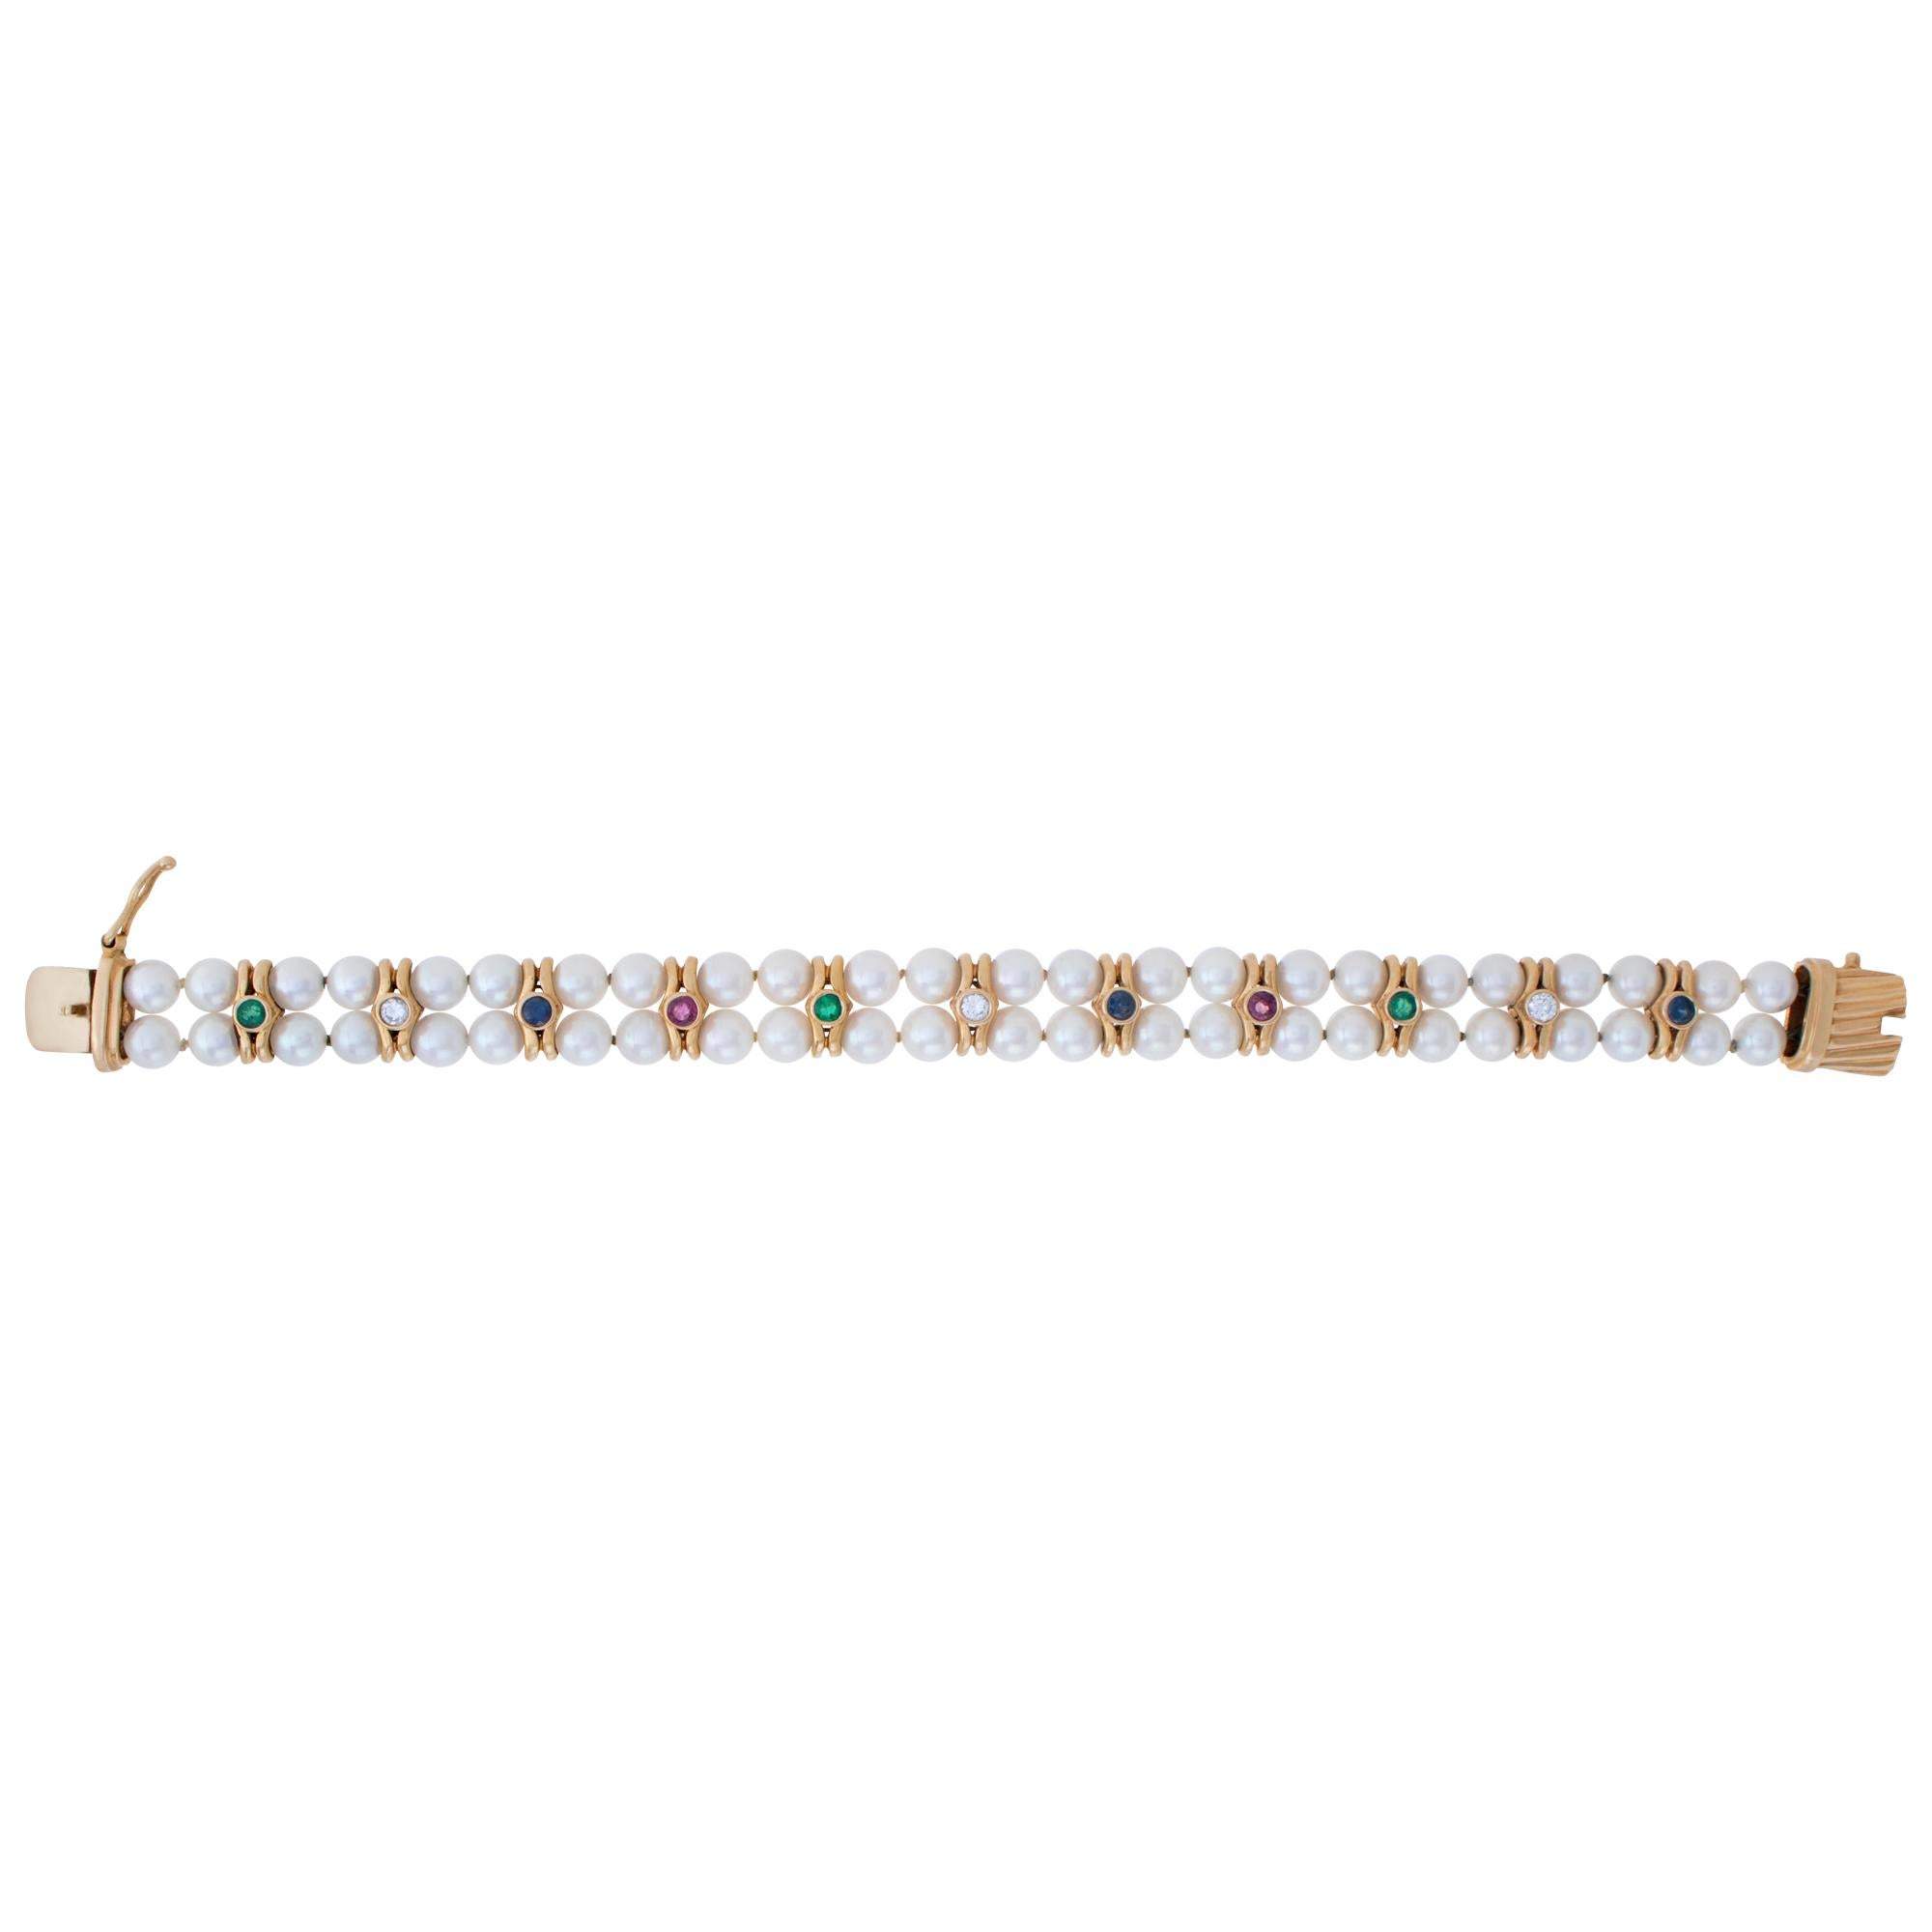 Pearl bracelet with rubies, diamonds, sapphires and emeralds in 14k yellow gold. Bracelet Length 7 inches, width 12mm.